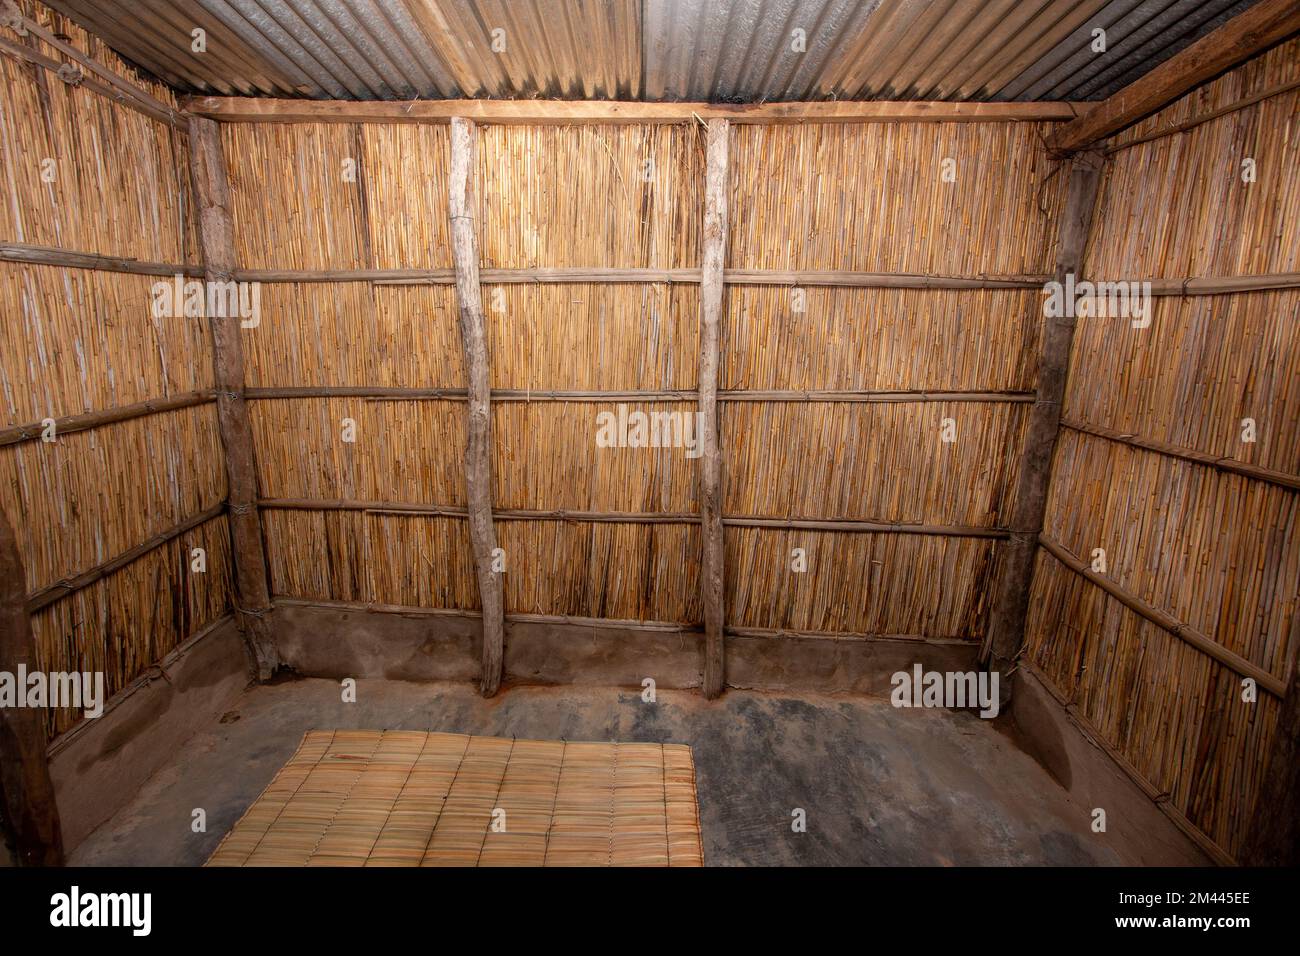 Interior view of a reed house bedroom, common in some parts of Africa, with reed walls, burnt concrete floors and zinc sheet roof Stock Photo